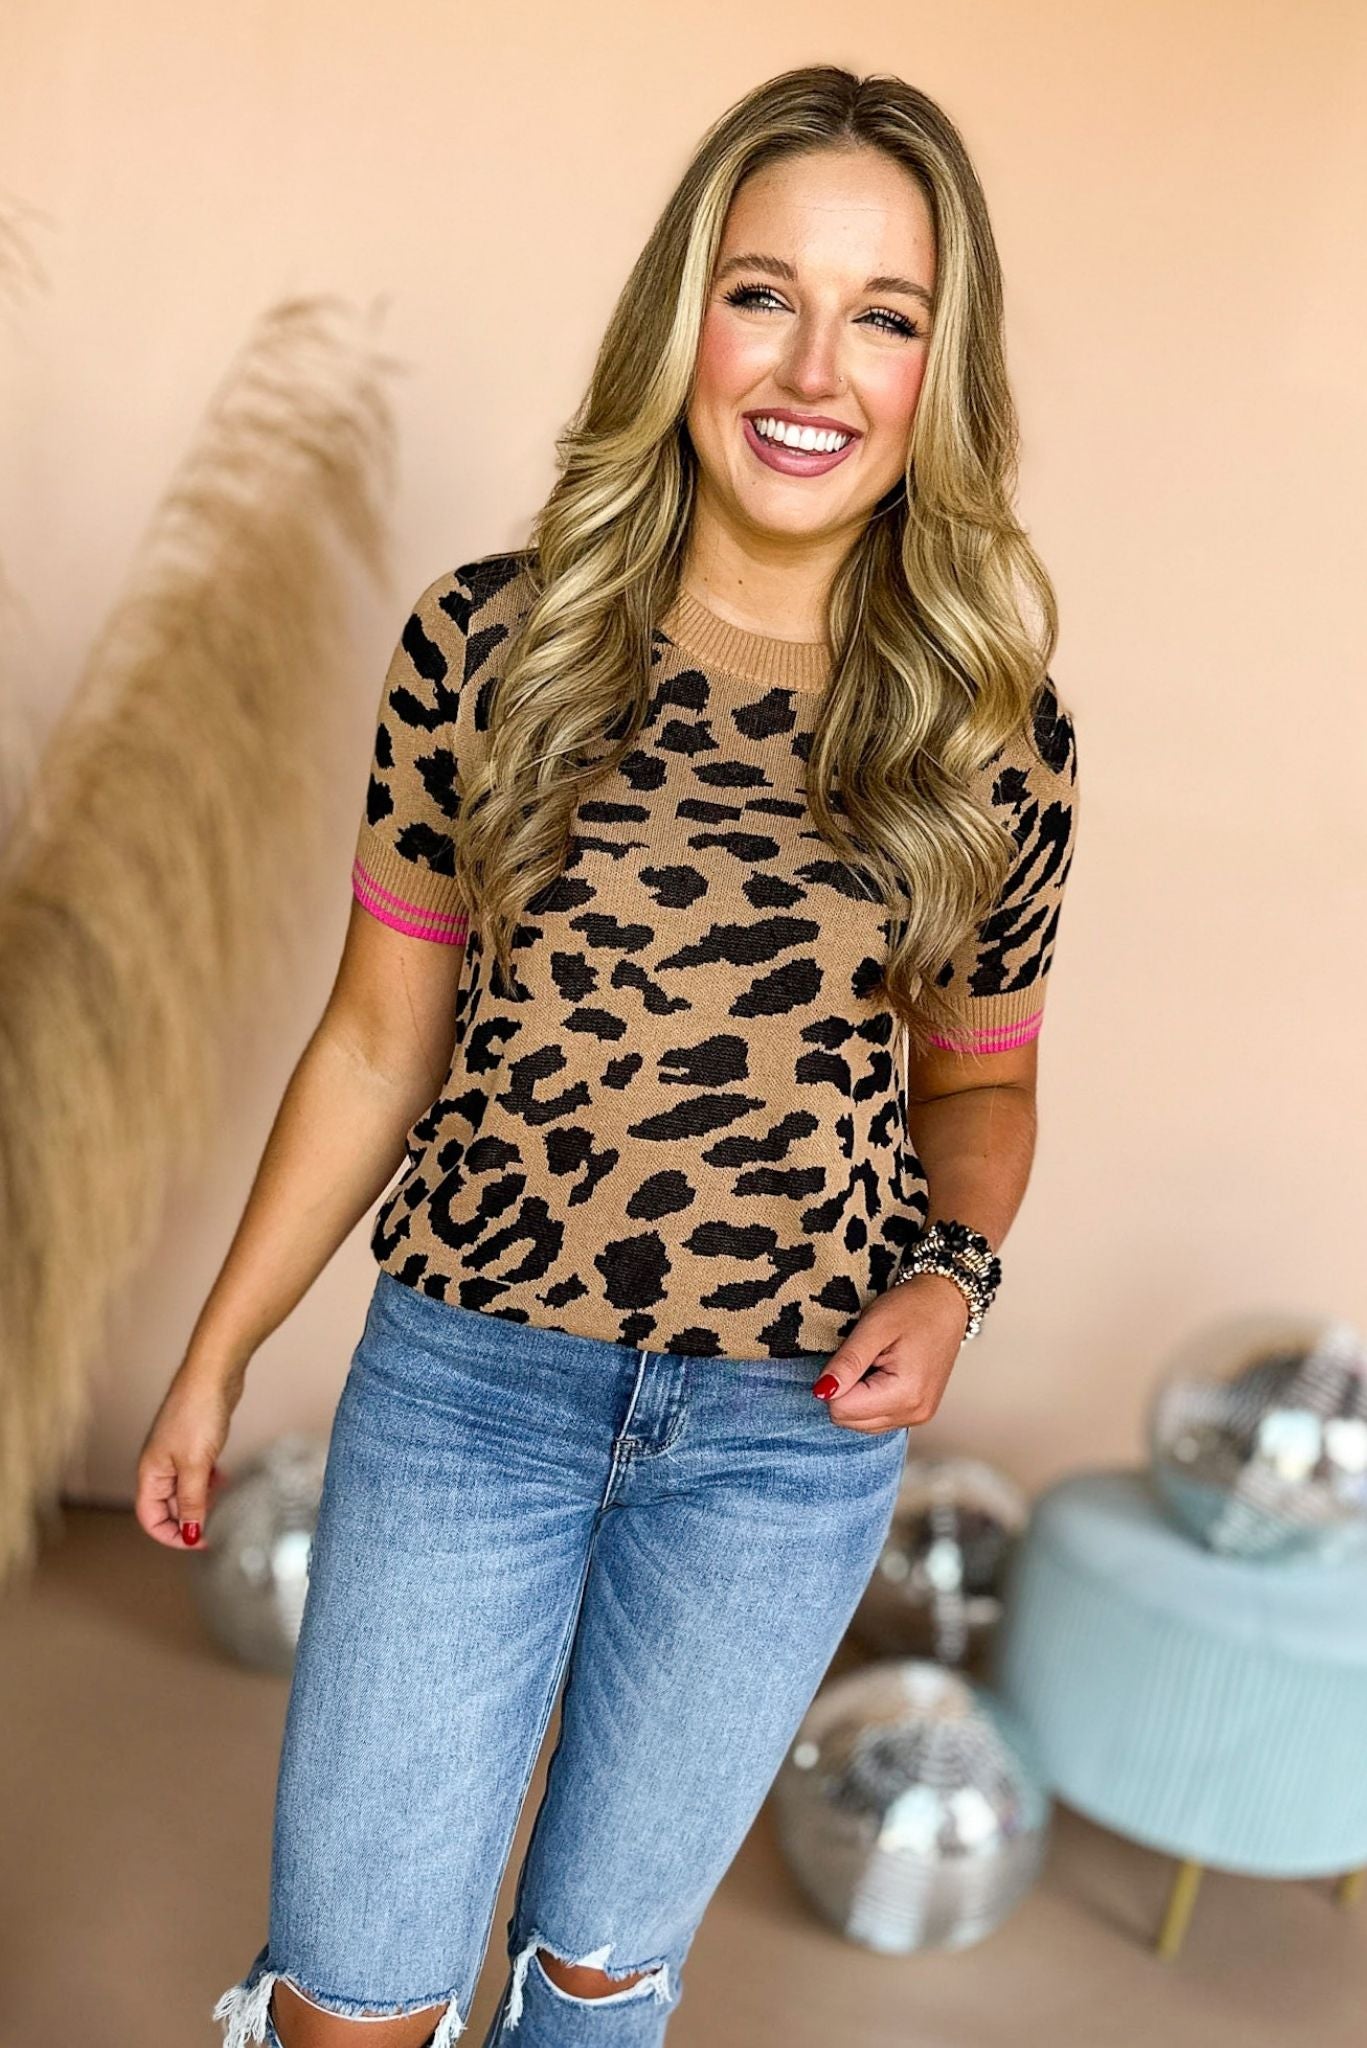 Camel Fuchsia Animal Printed Colorblock Short Sleeve Knit Top, animal print top, mom style, mom chic, fall style, elevated style, must have fall, must have top, transition piece, shop style your senses by mallory fitzsimmons